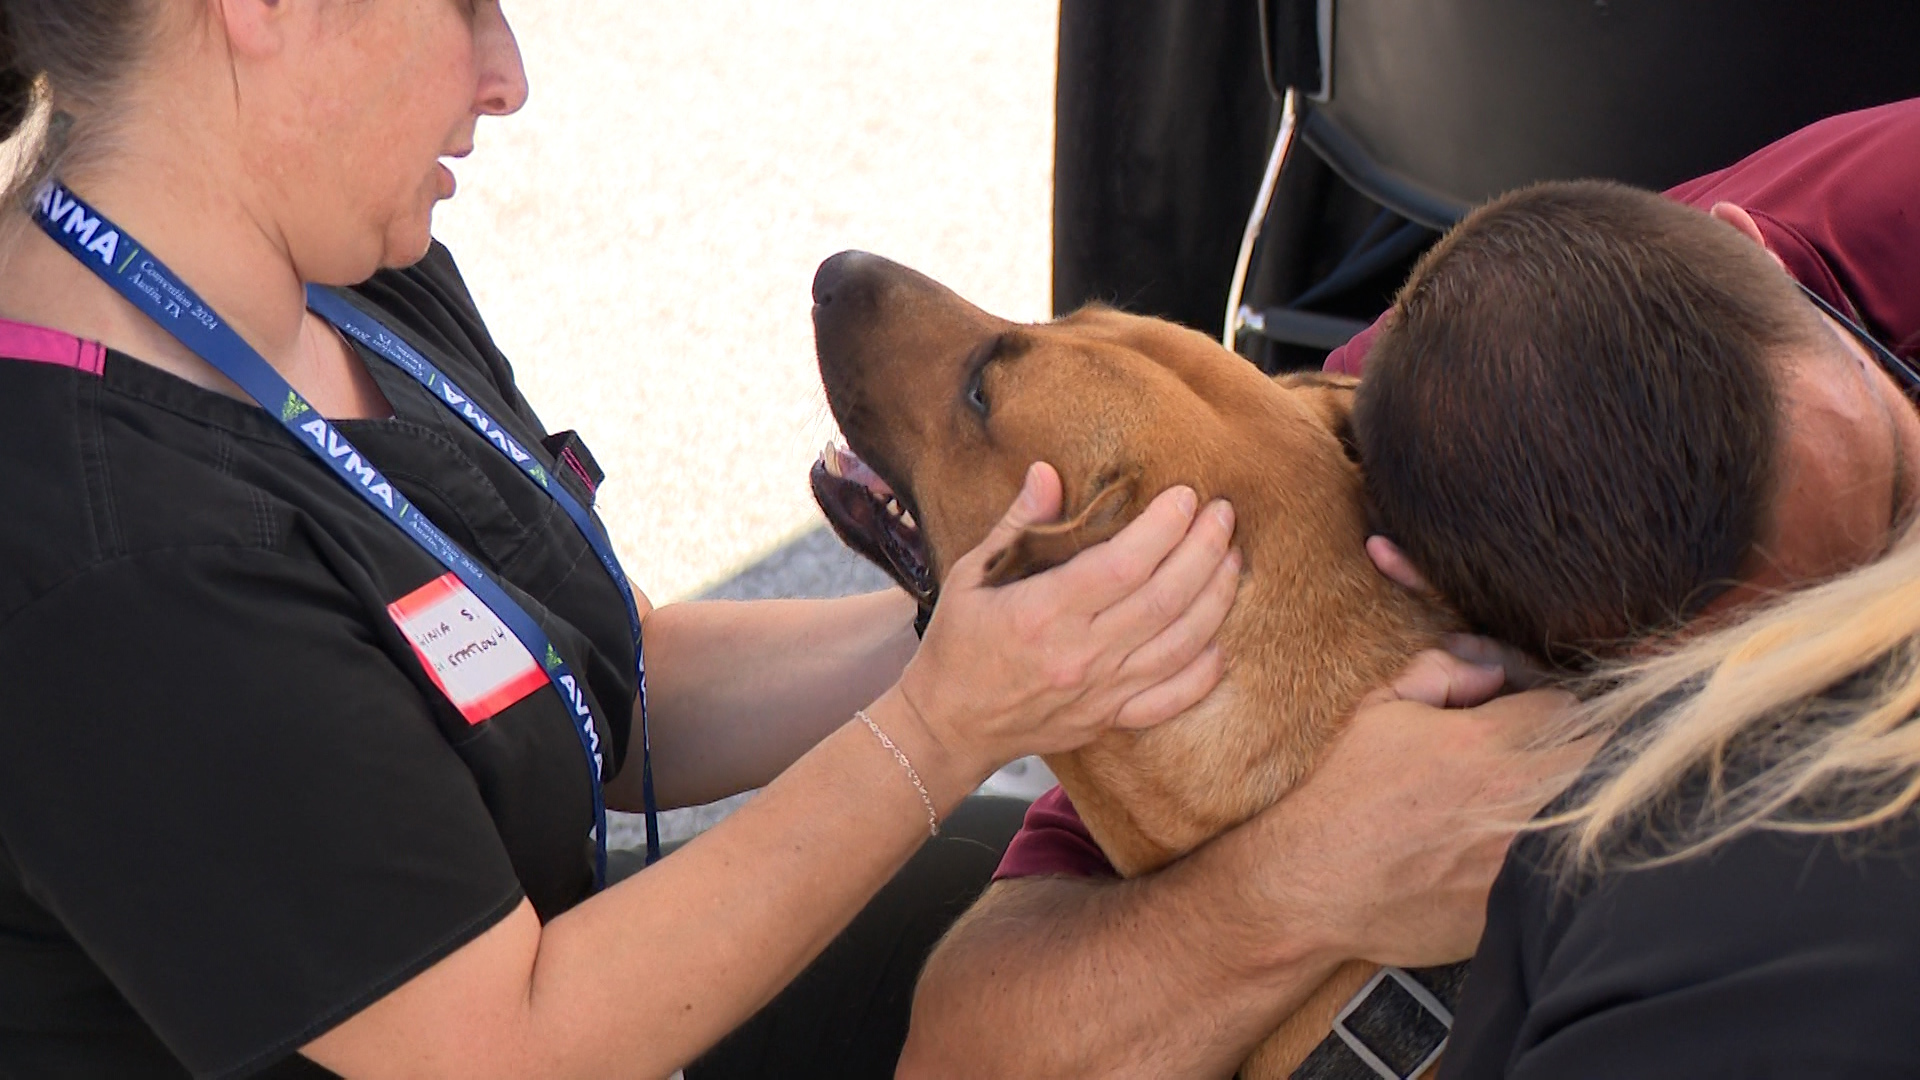 The Street Dog Coalition and vets with the AVMA partnered together to give unhoused pets vaccines, health check-ups and any other medical care they needed.